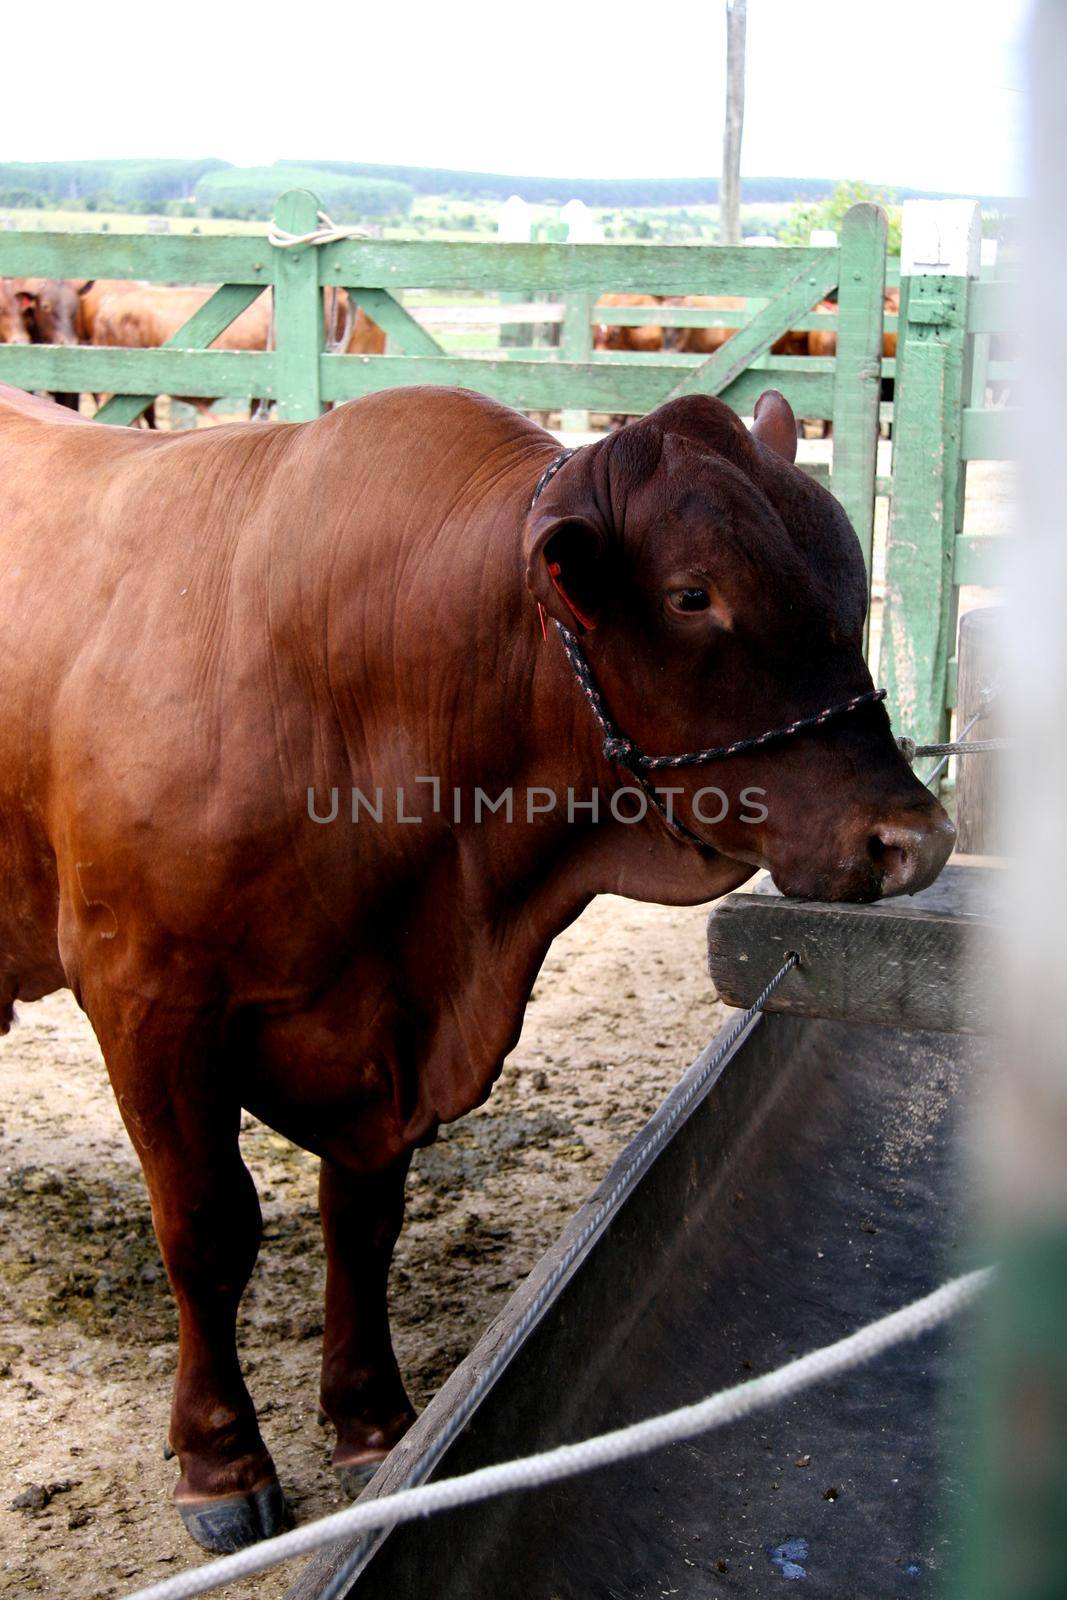 eunapolis, bahia / brazil - march 28, 2008: cattle are seen on a farm in the city of Eunapolis.